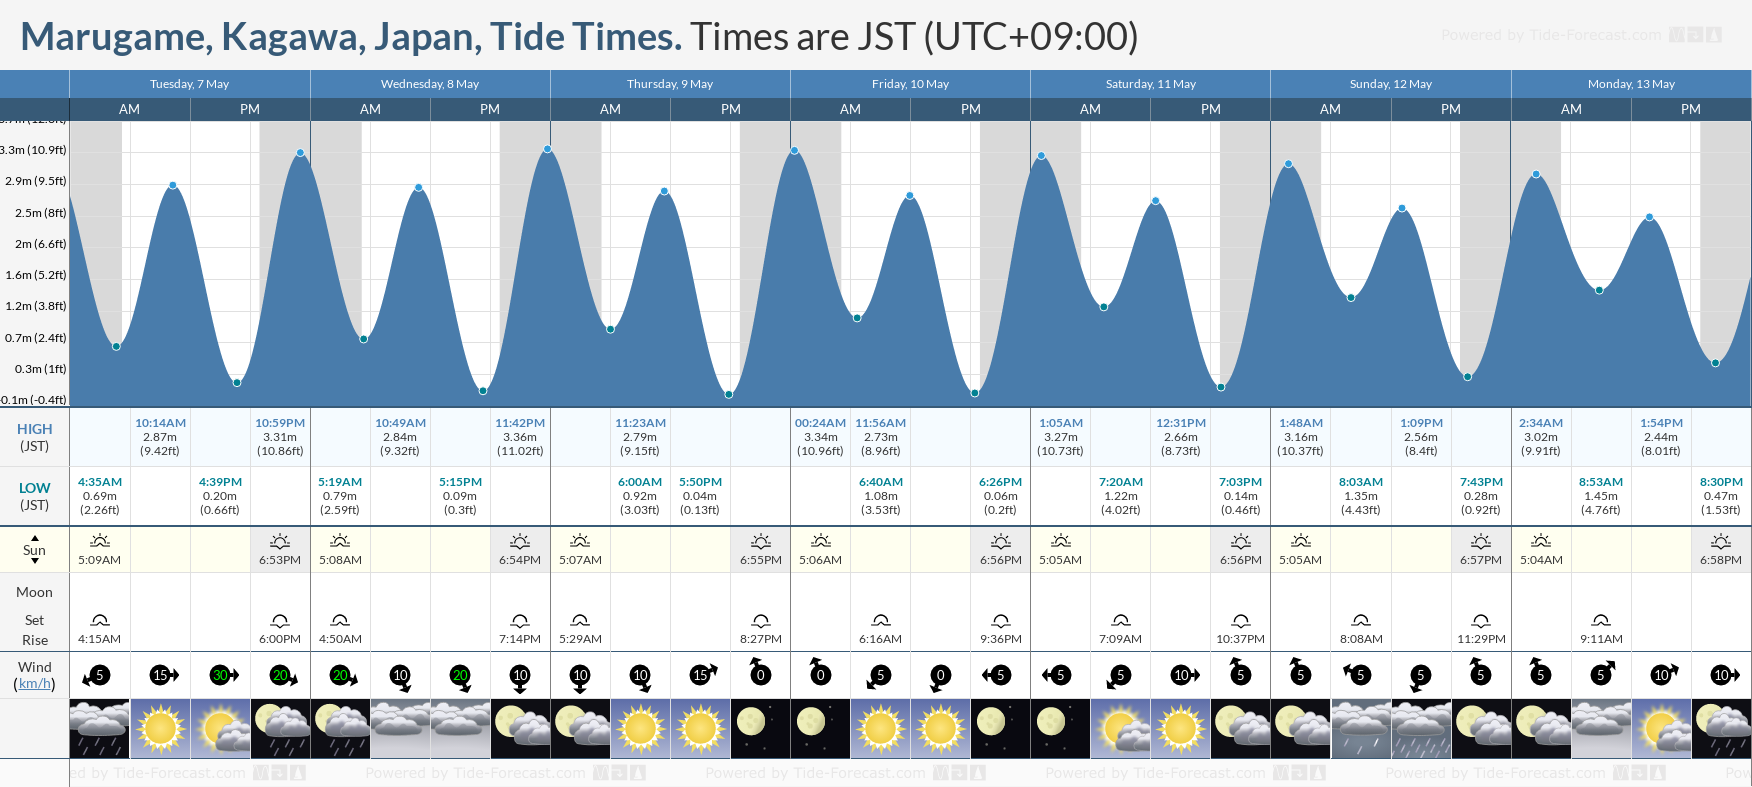 Marugame, Kagawa, Japan Tide Chart including high and low tide tide times for the next 7 days